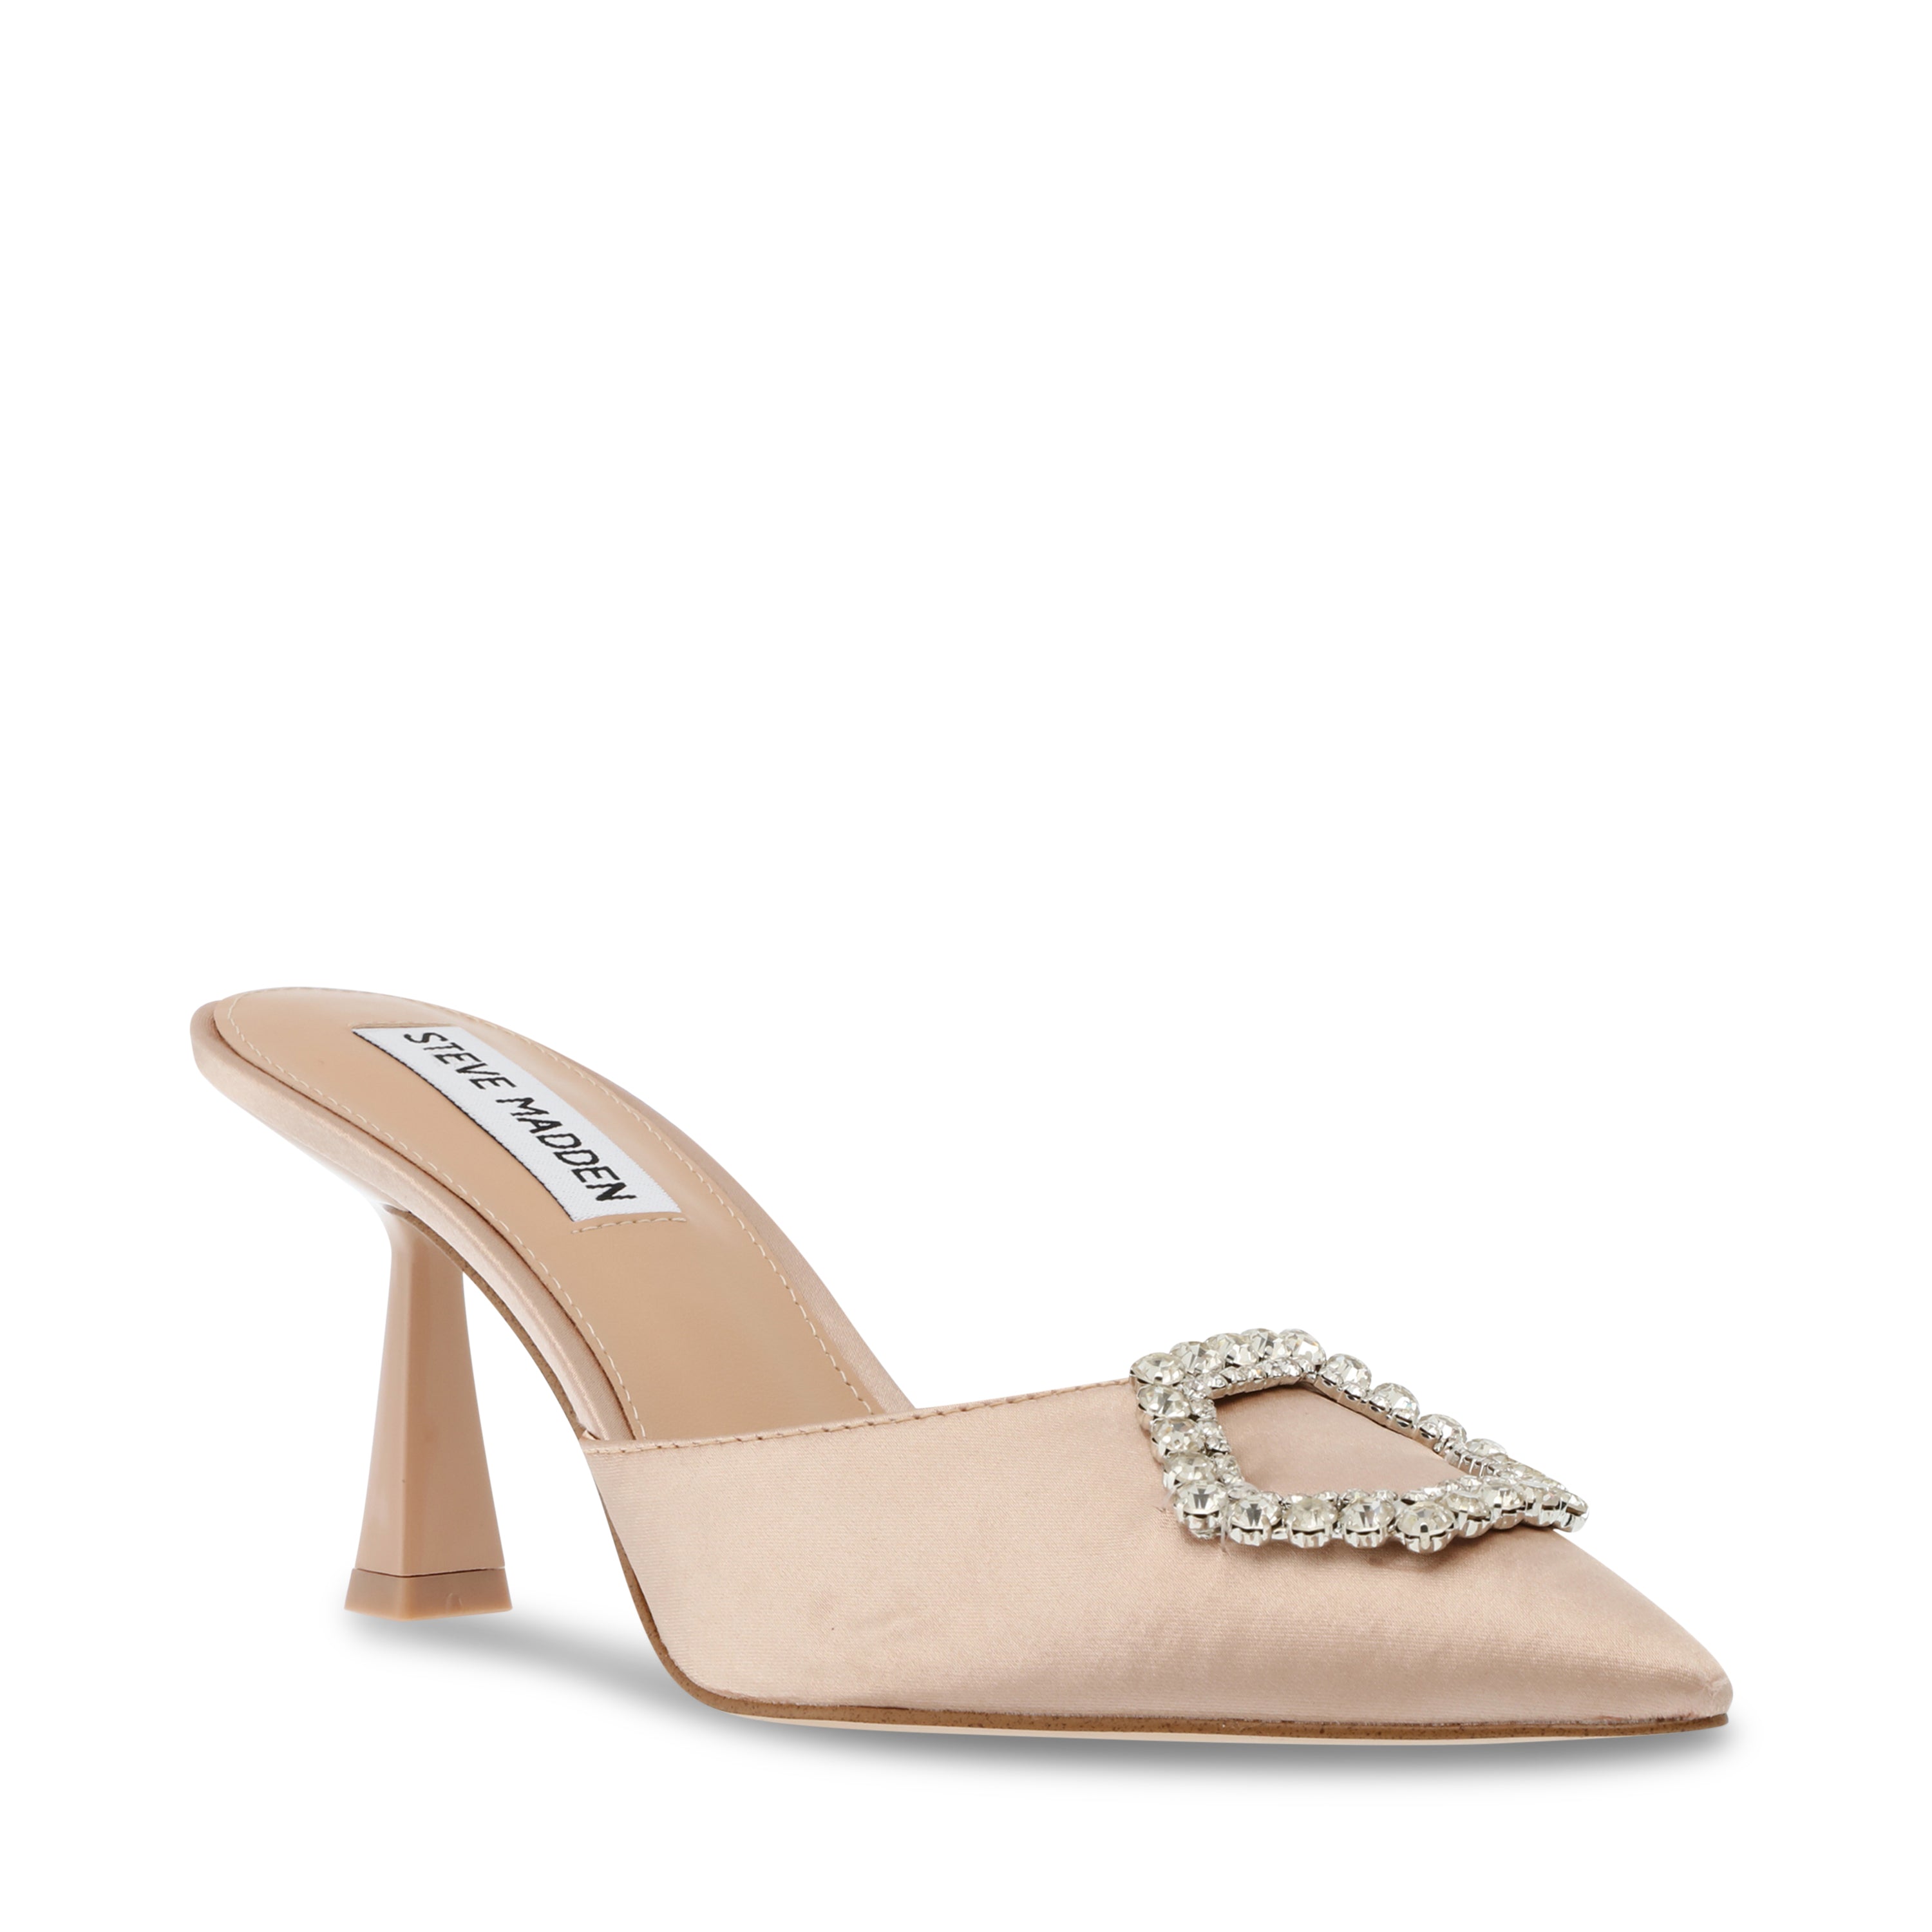 LuxeCity Nude Satin- Hover Image